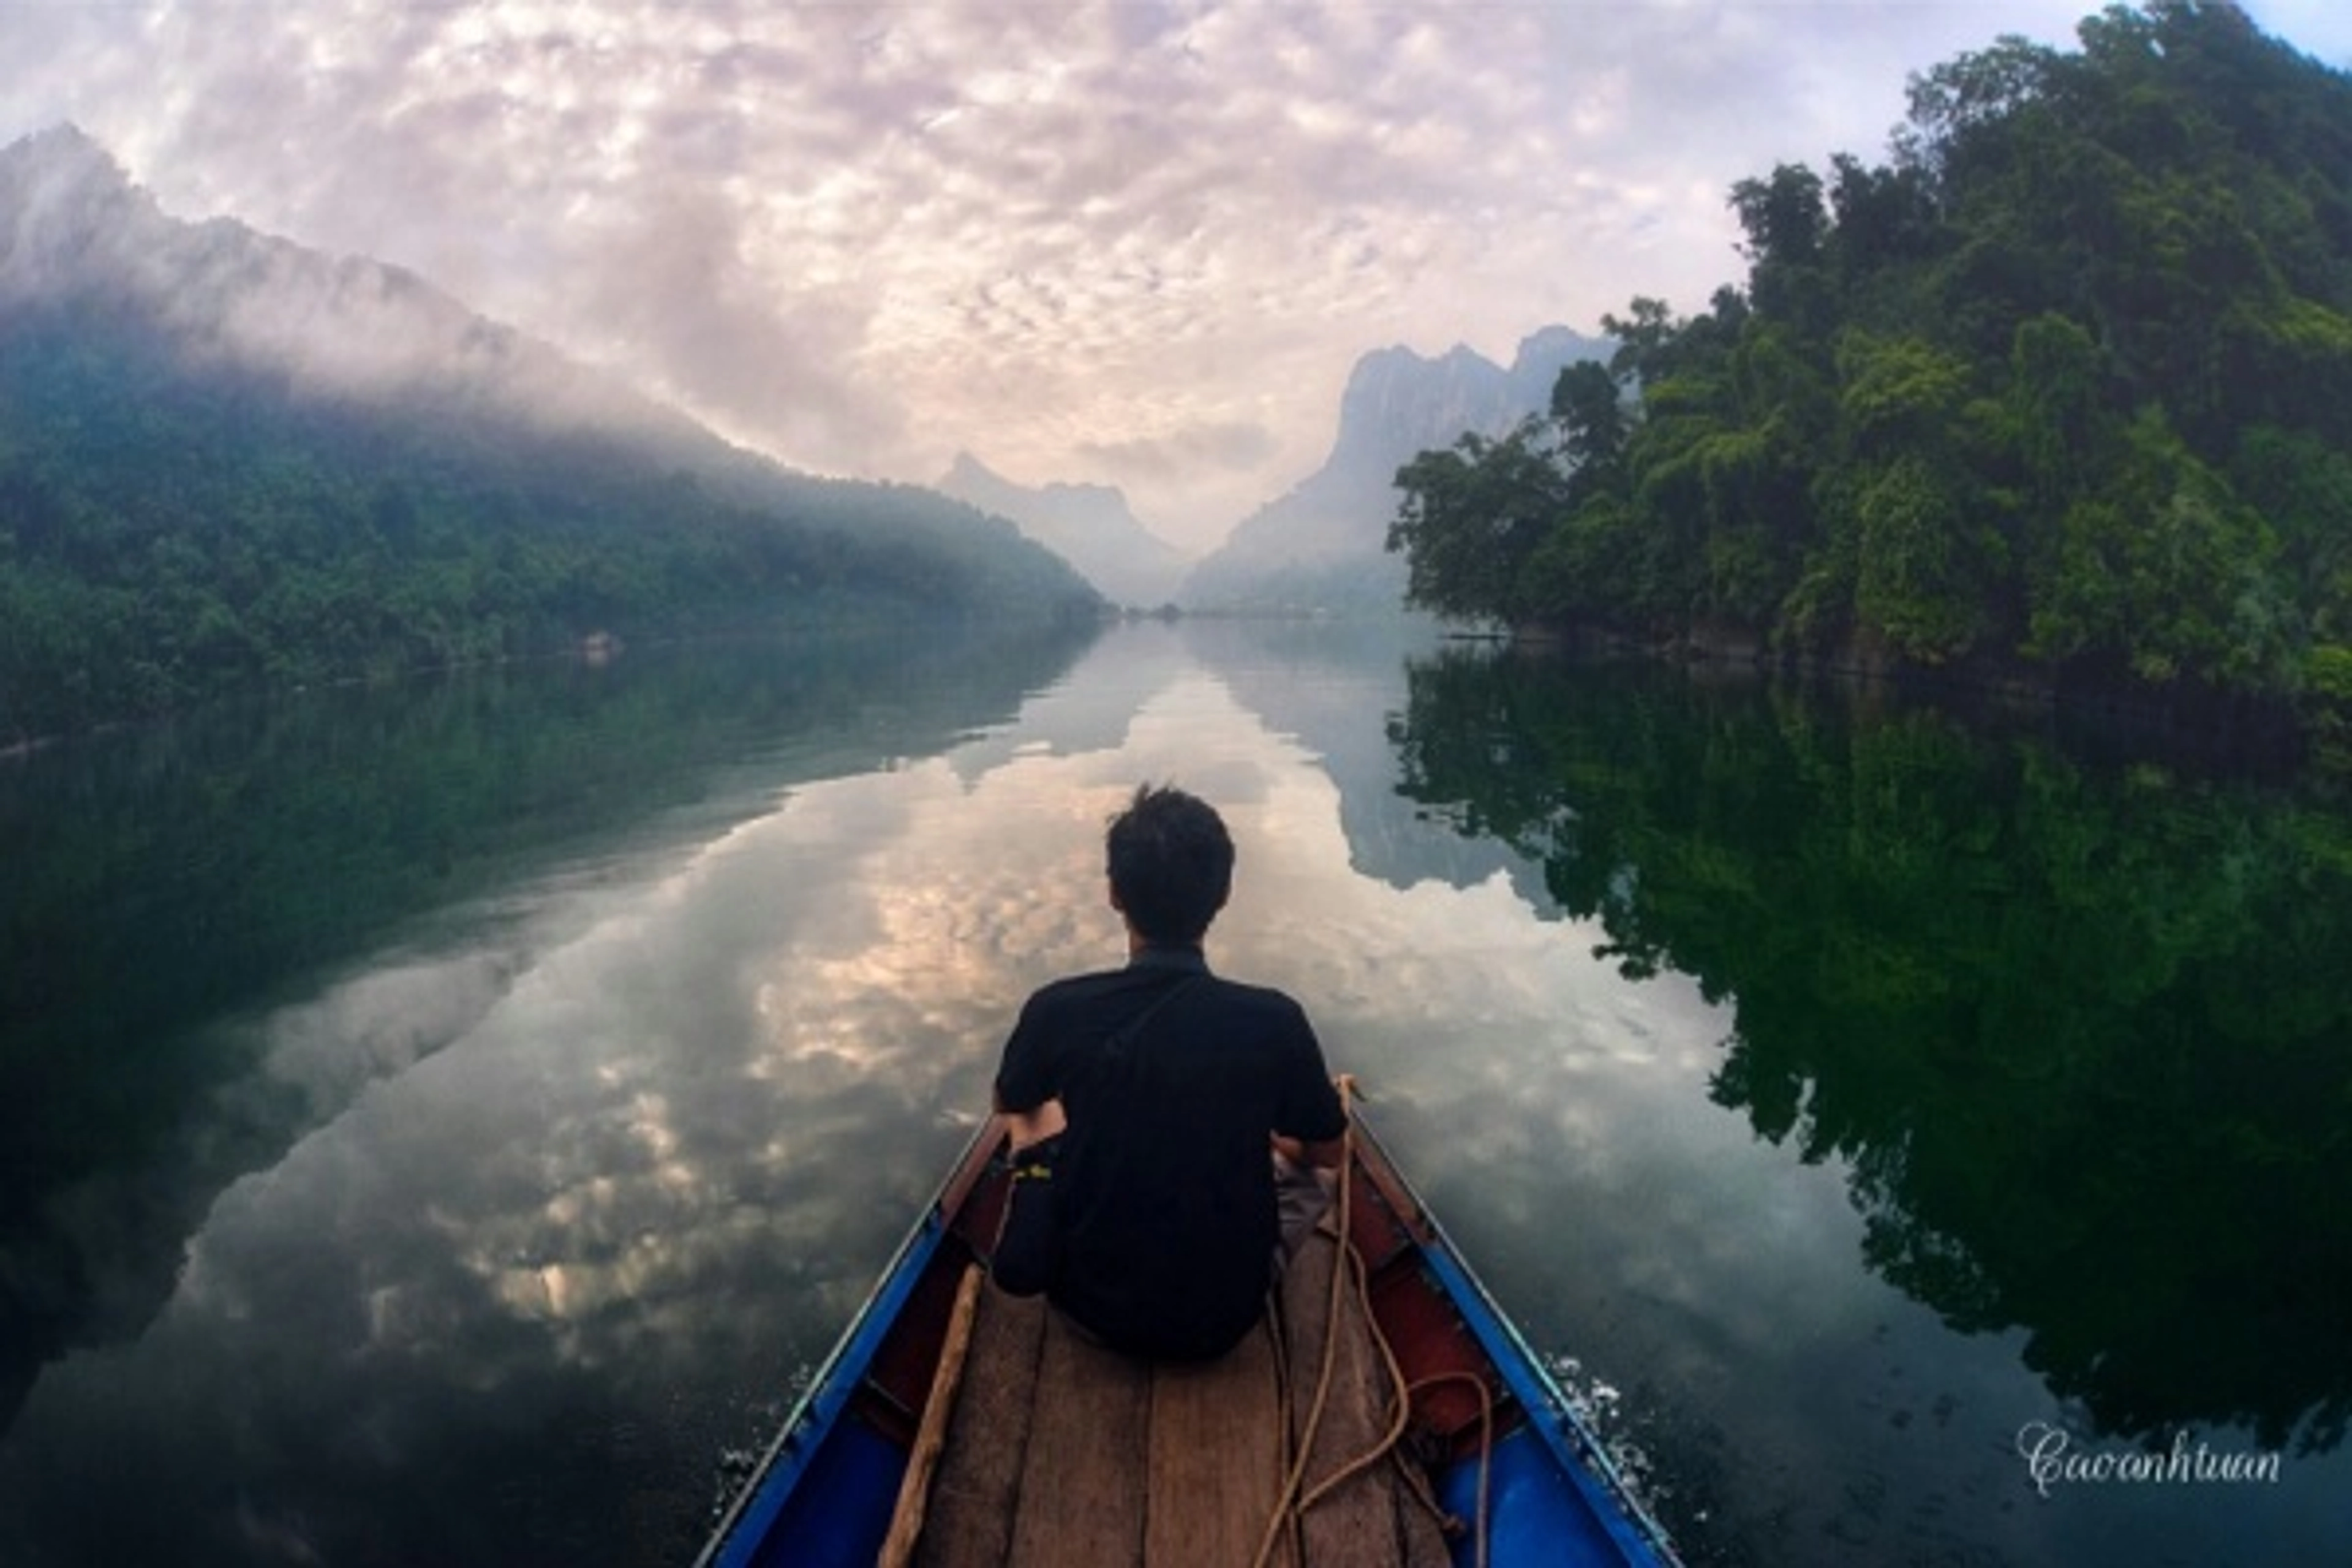 Ba Be Lake - The most unique lake in Vietnam